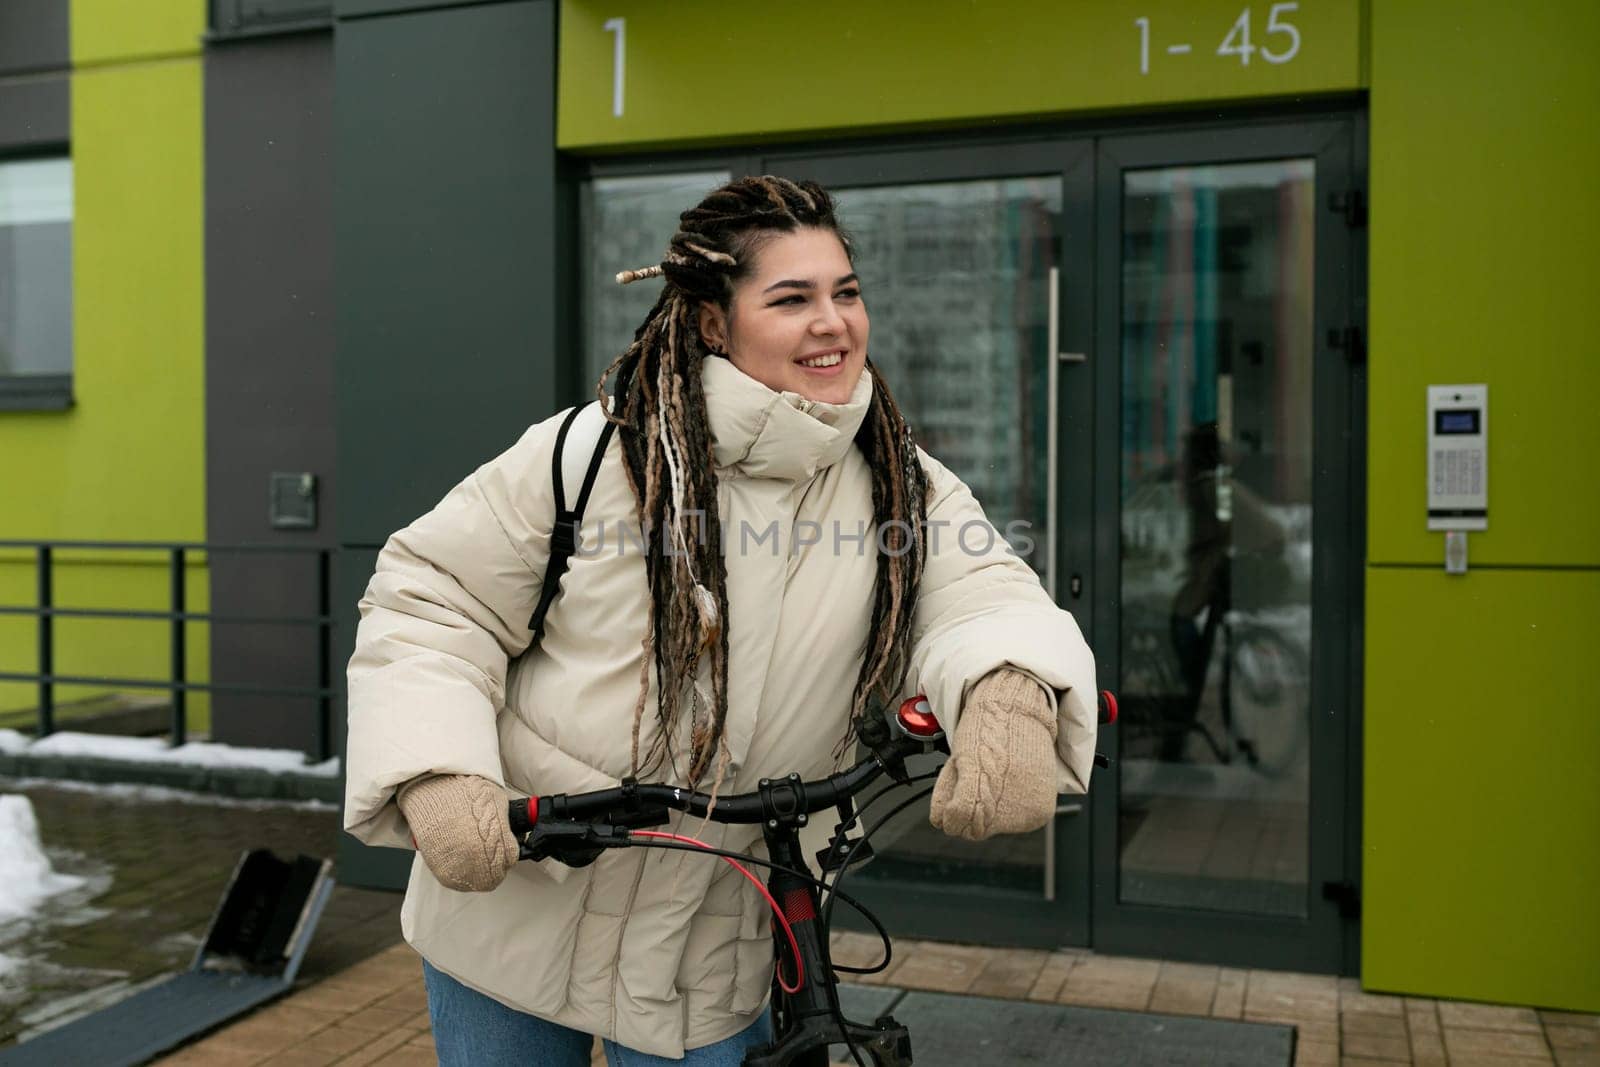 A woman with dreadlocks is energetically riding a bike down a city street. She is dressed casually and confidently navigates through traffic with ease.